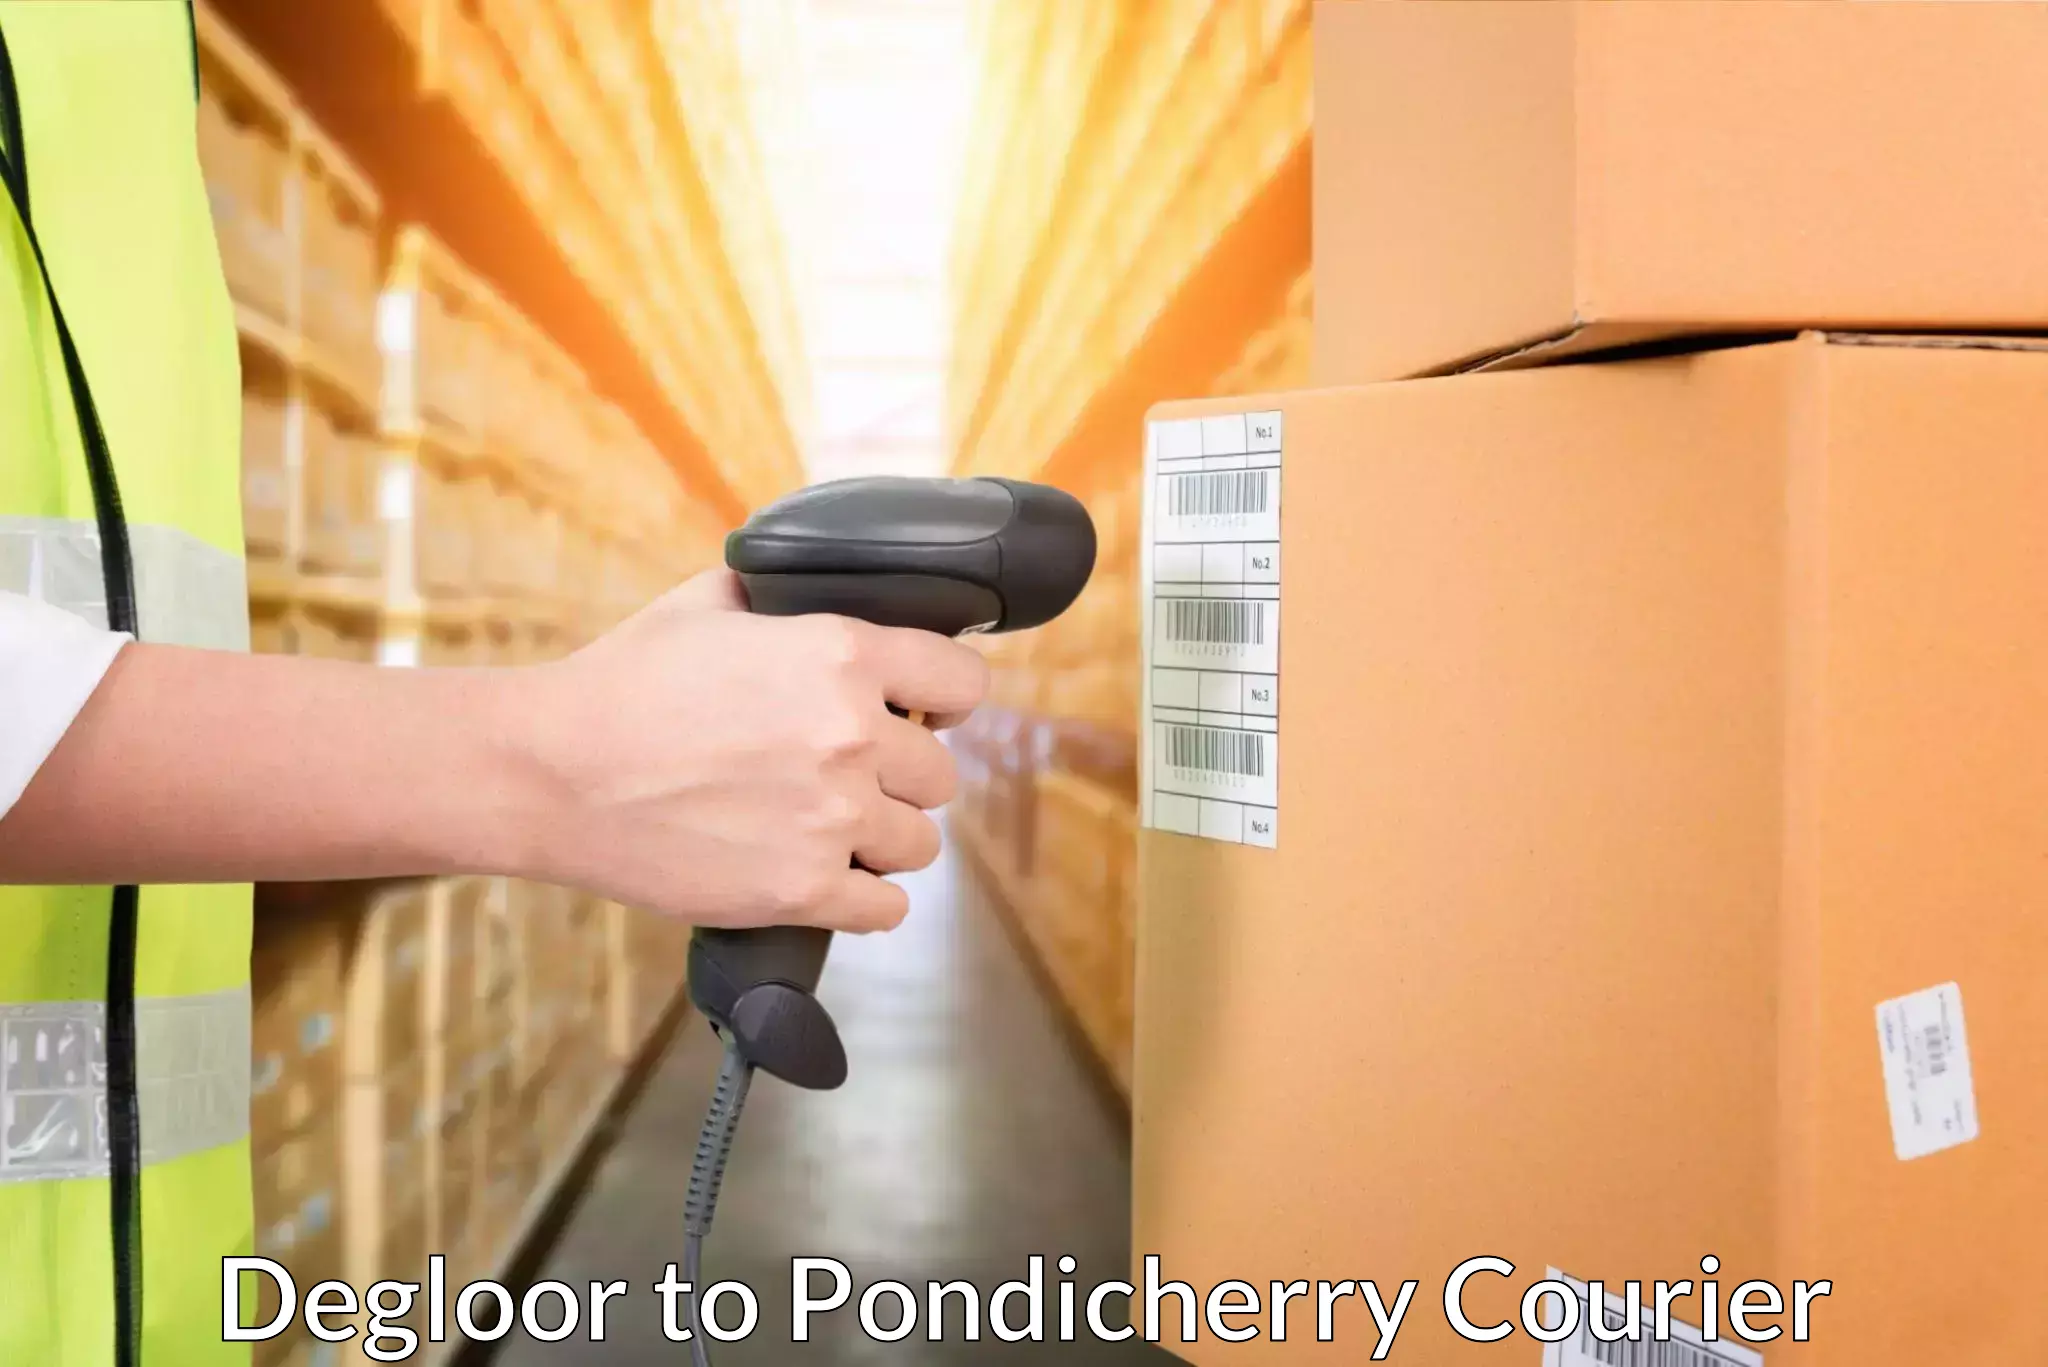 Global delivery options Degloor to Pondicherry